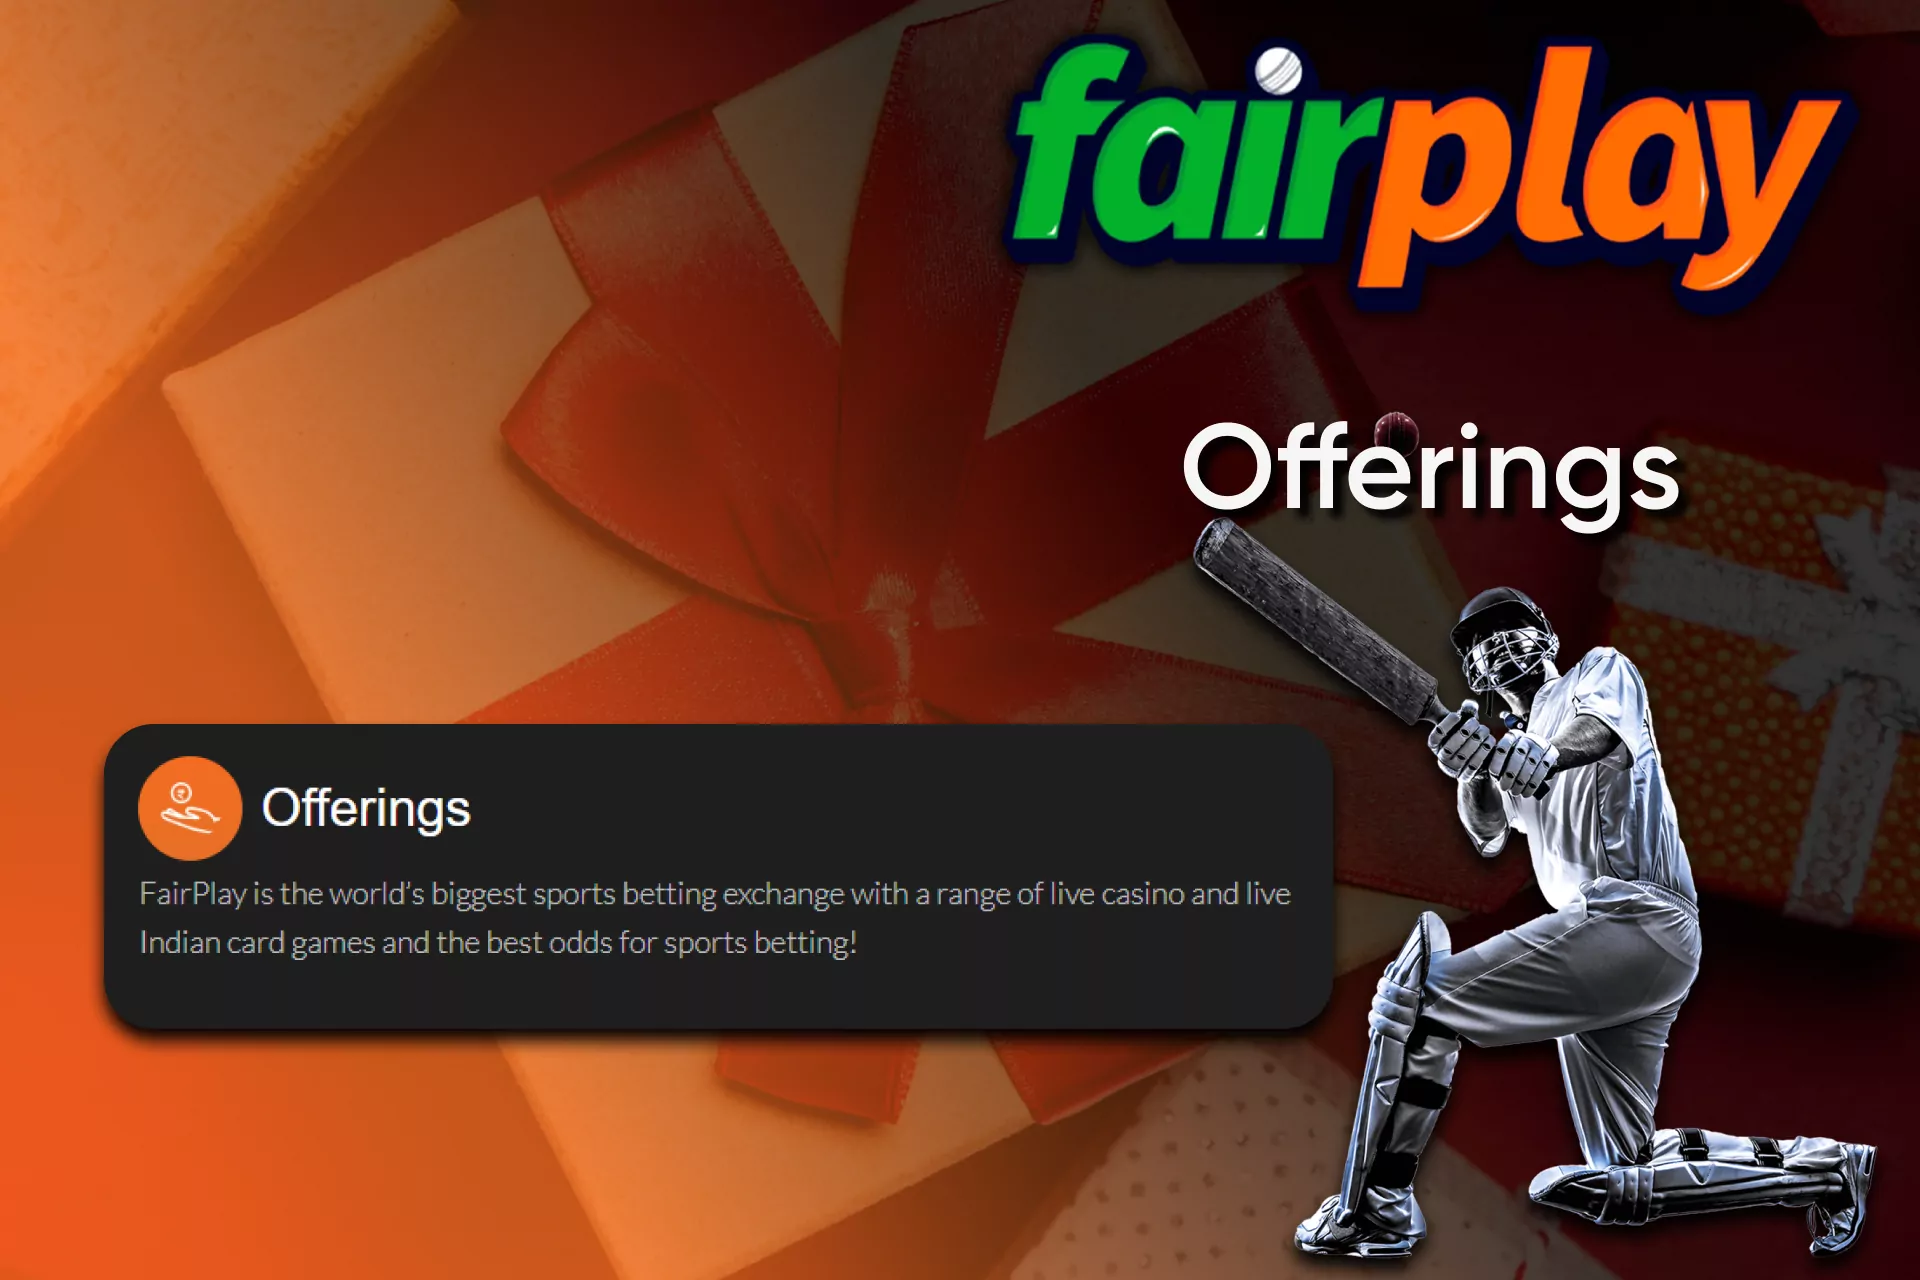 Fairplay has an excellent interface, range of matches, odds and bonus offers that you can promote to your friends.